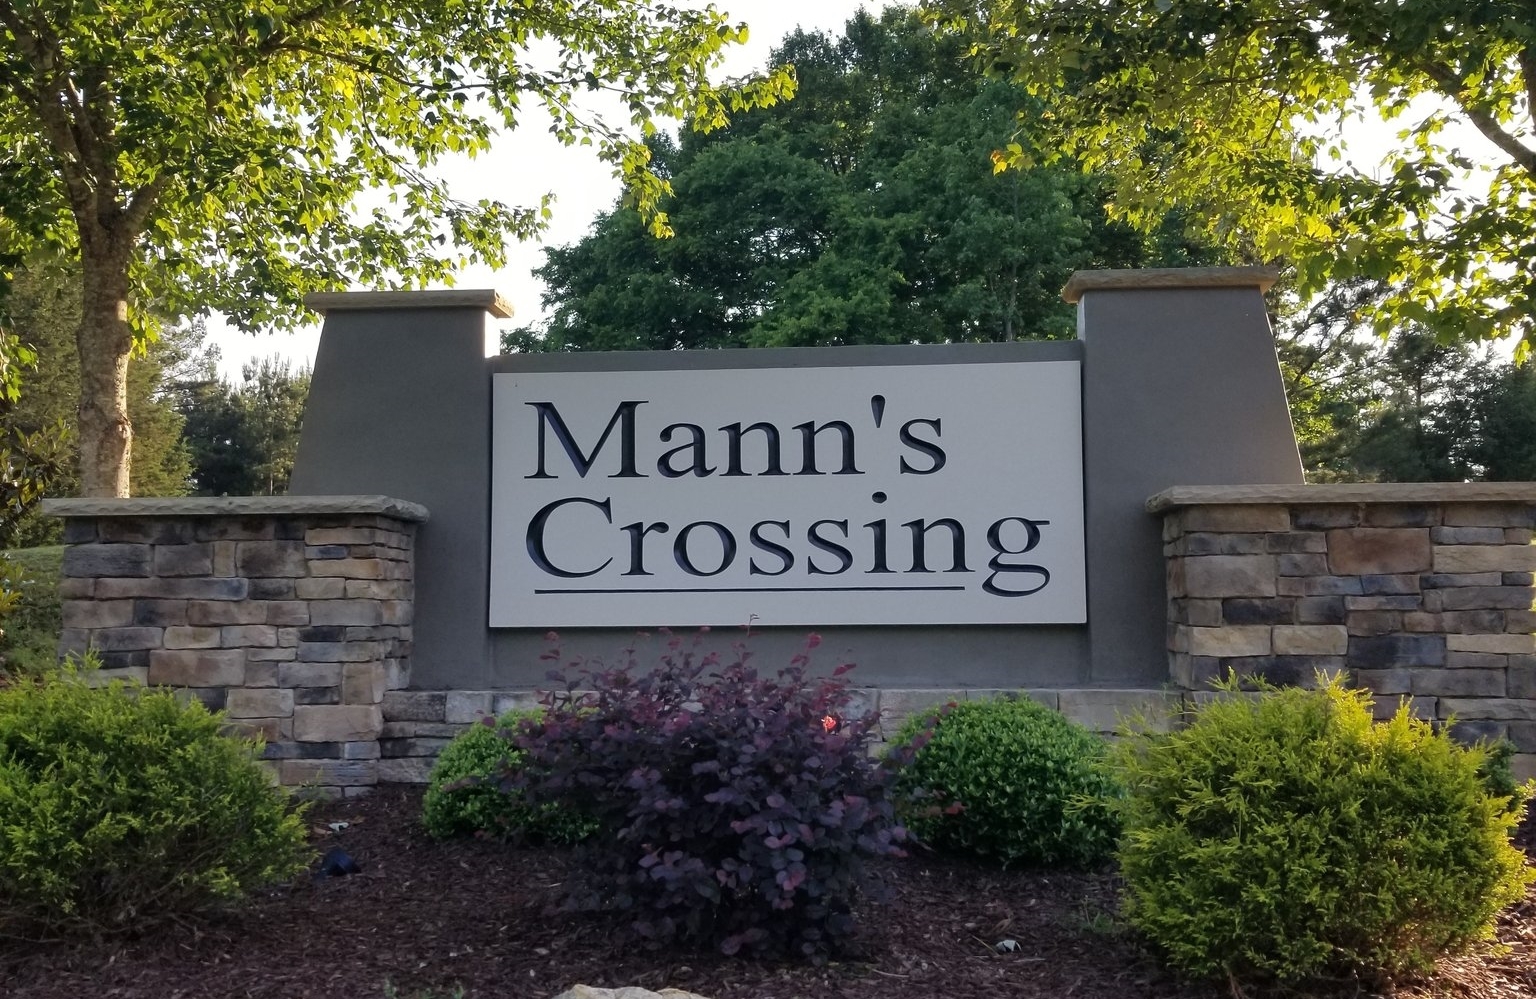 Entrance to Manns Crossing